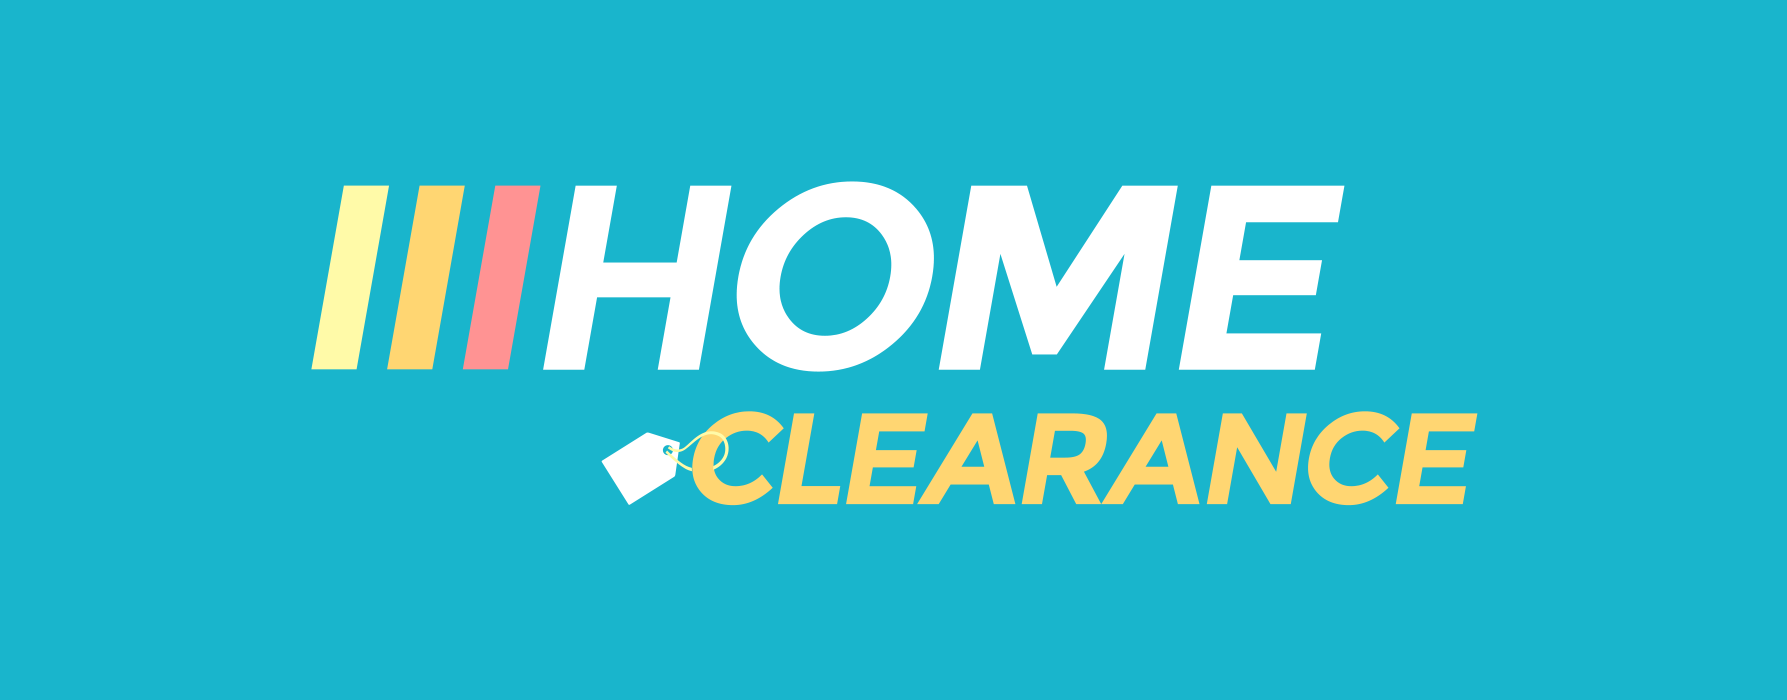 All Home Clearance  Australia Finds, Options, Promo Codes & Vegan Specials